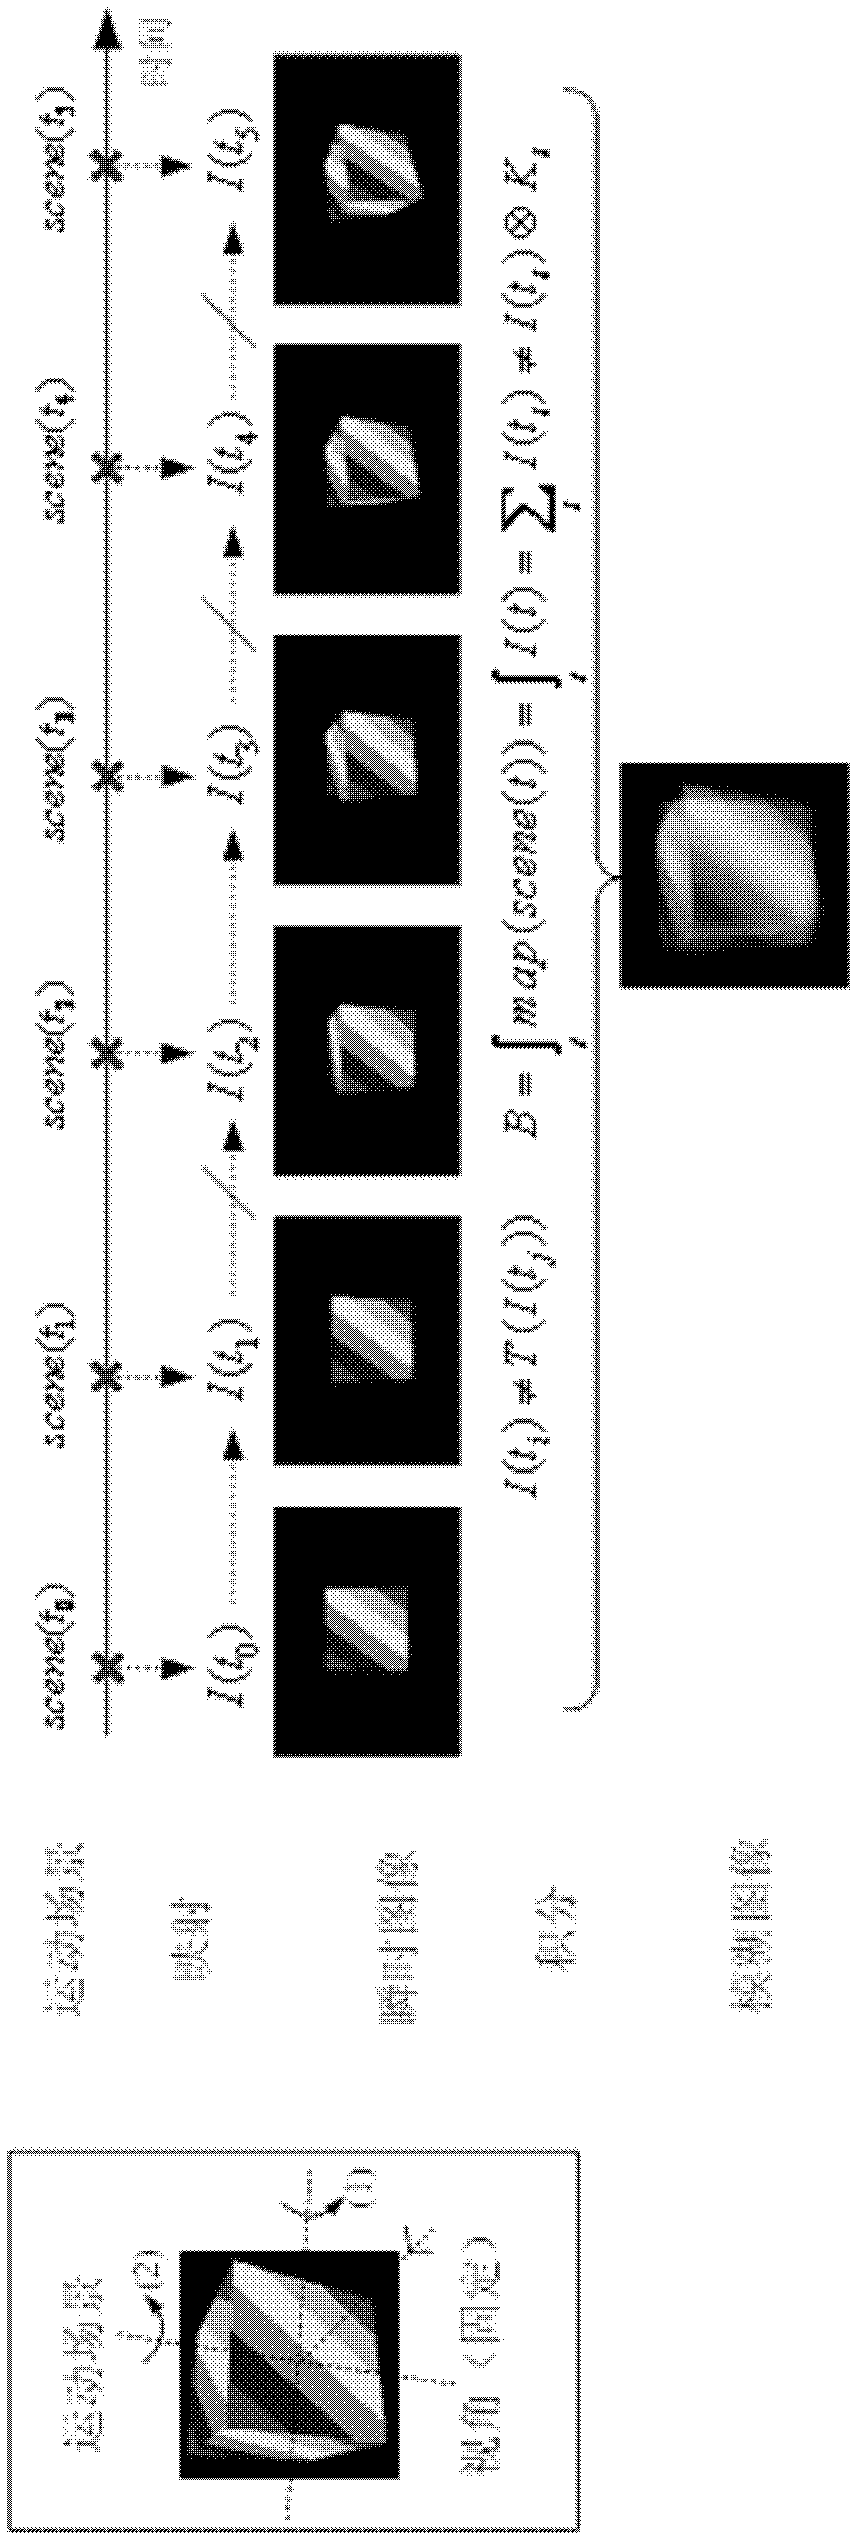 A method and system for three-dimensional motion deblurring with different spatial blur kernels